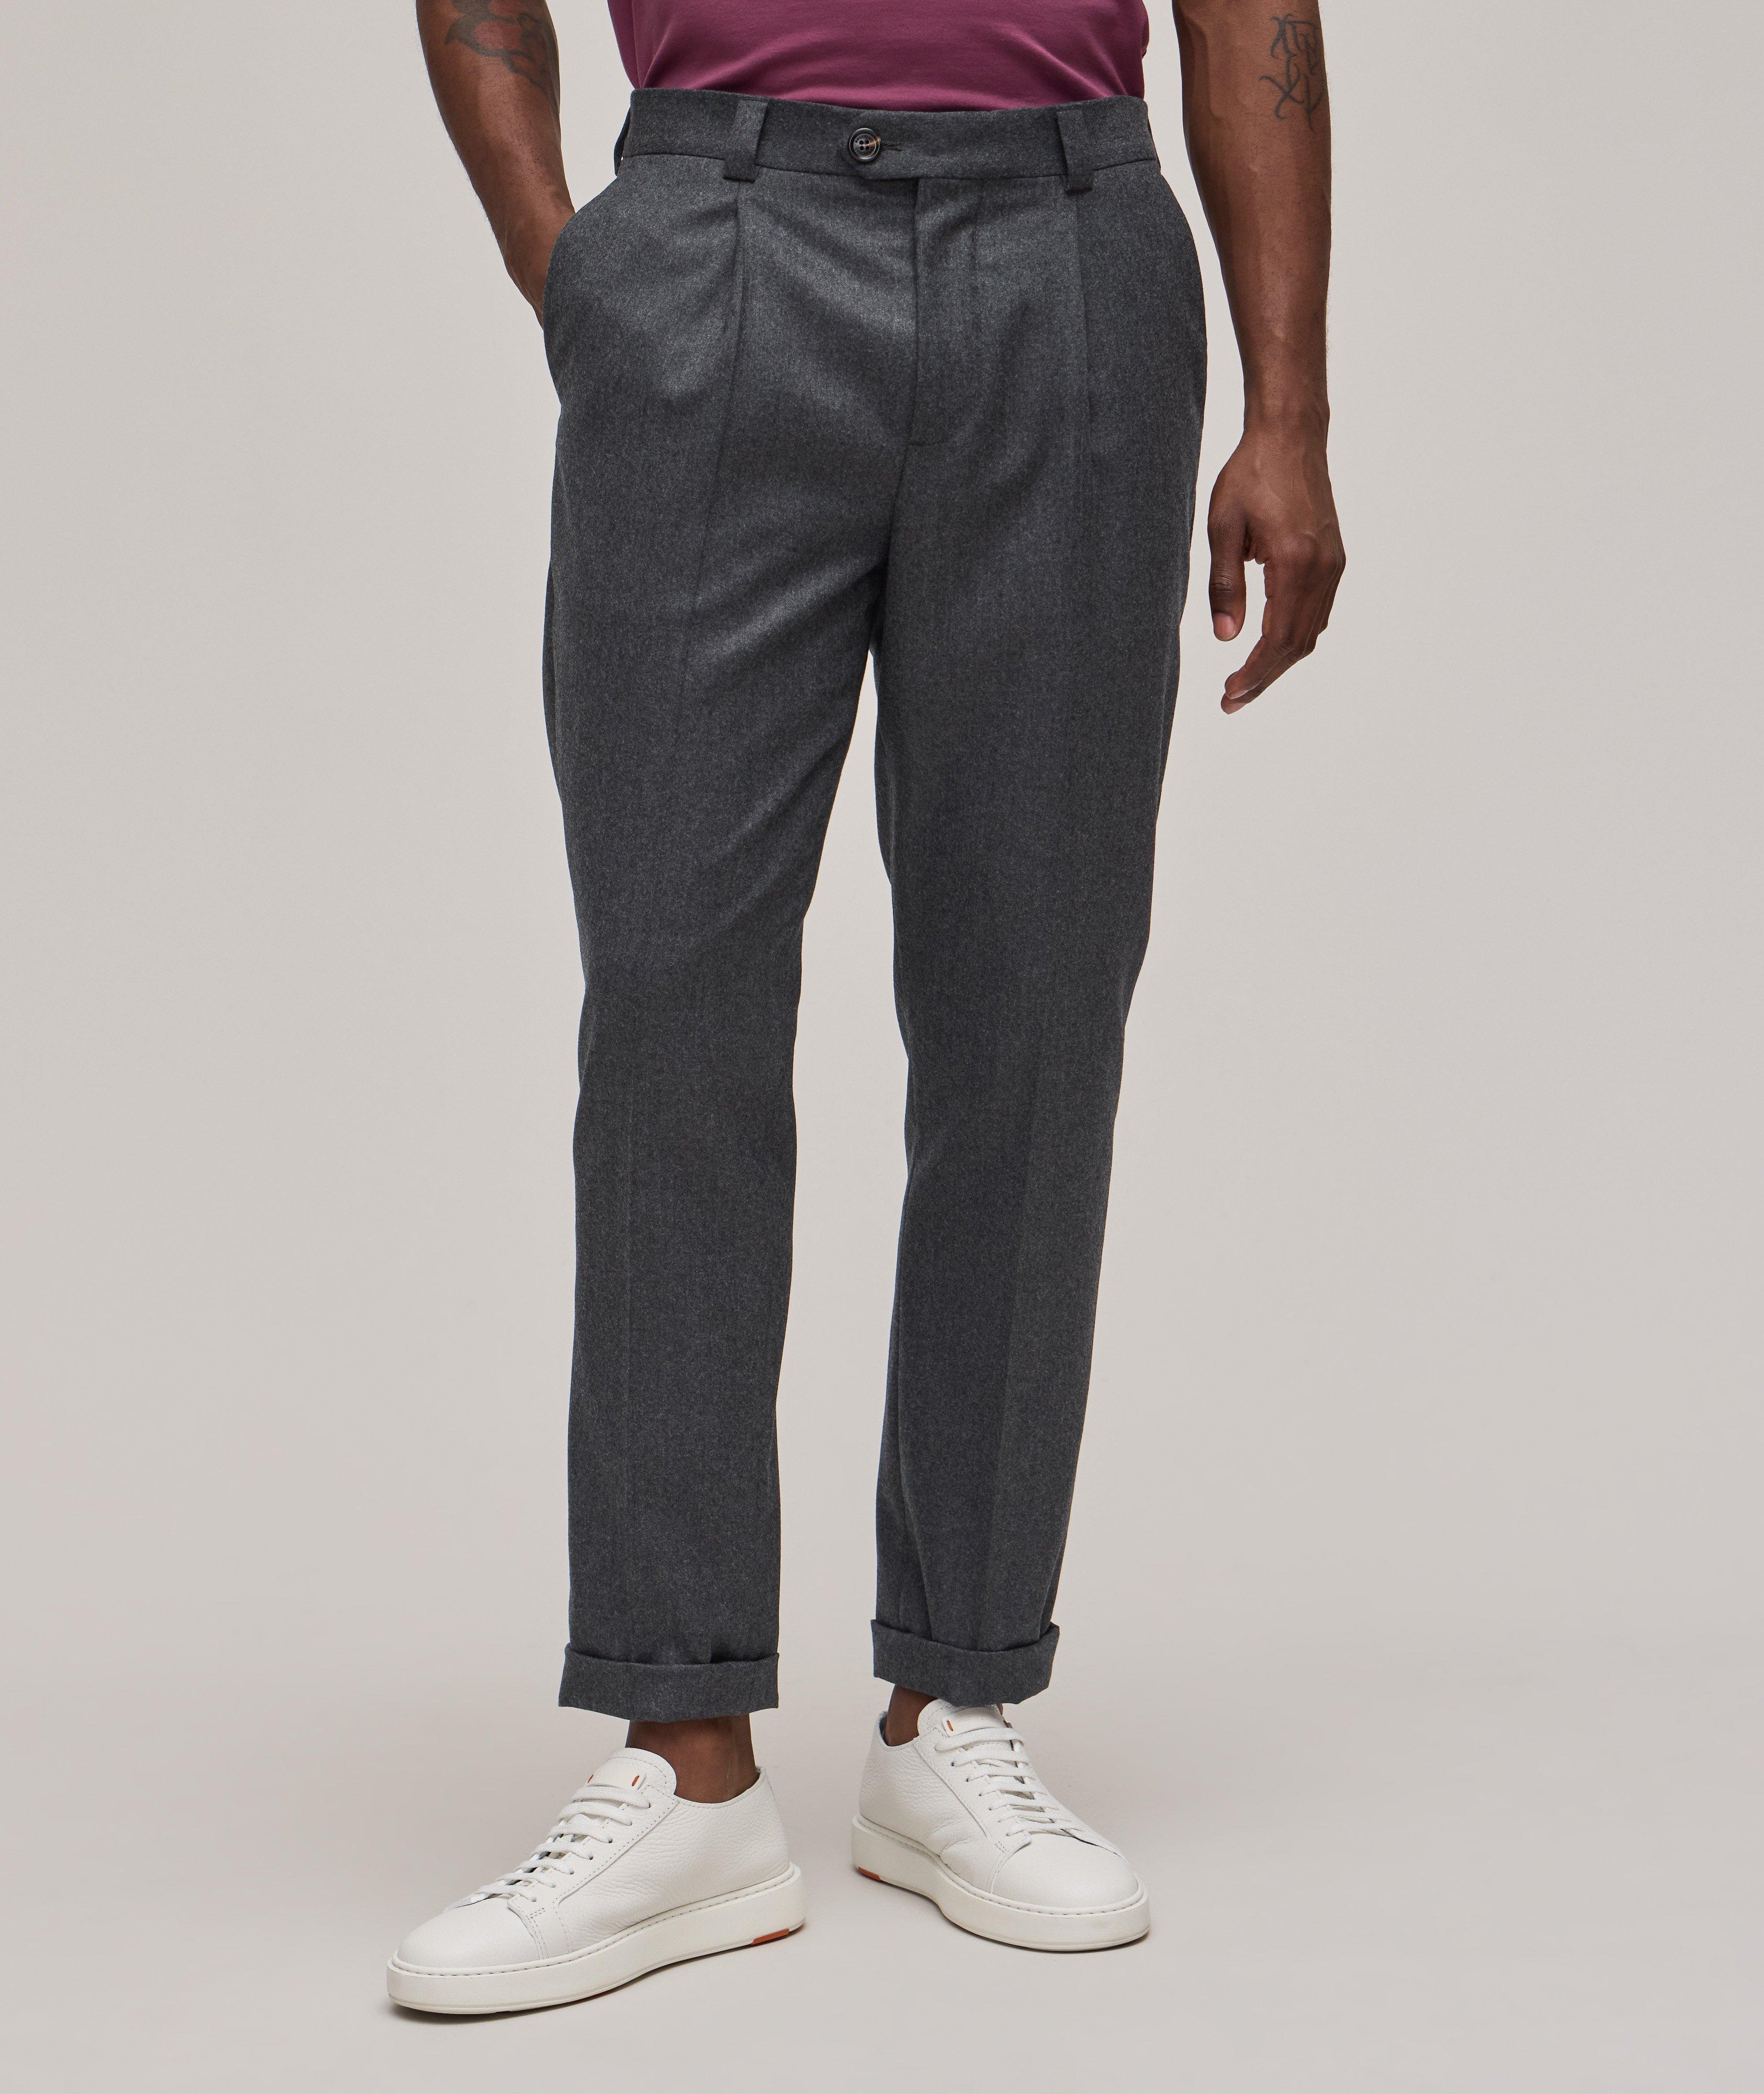 Flannel Wool Leisure Fit Trousers image 1